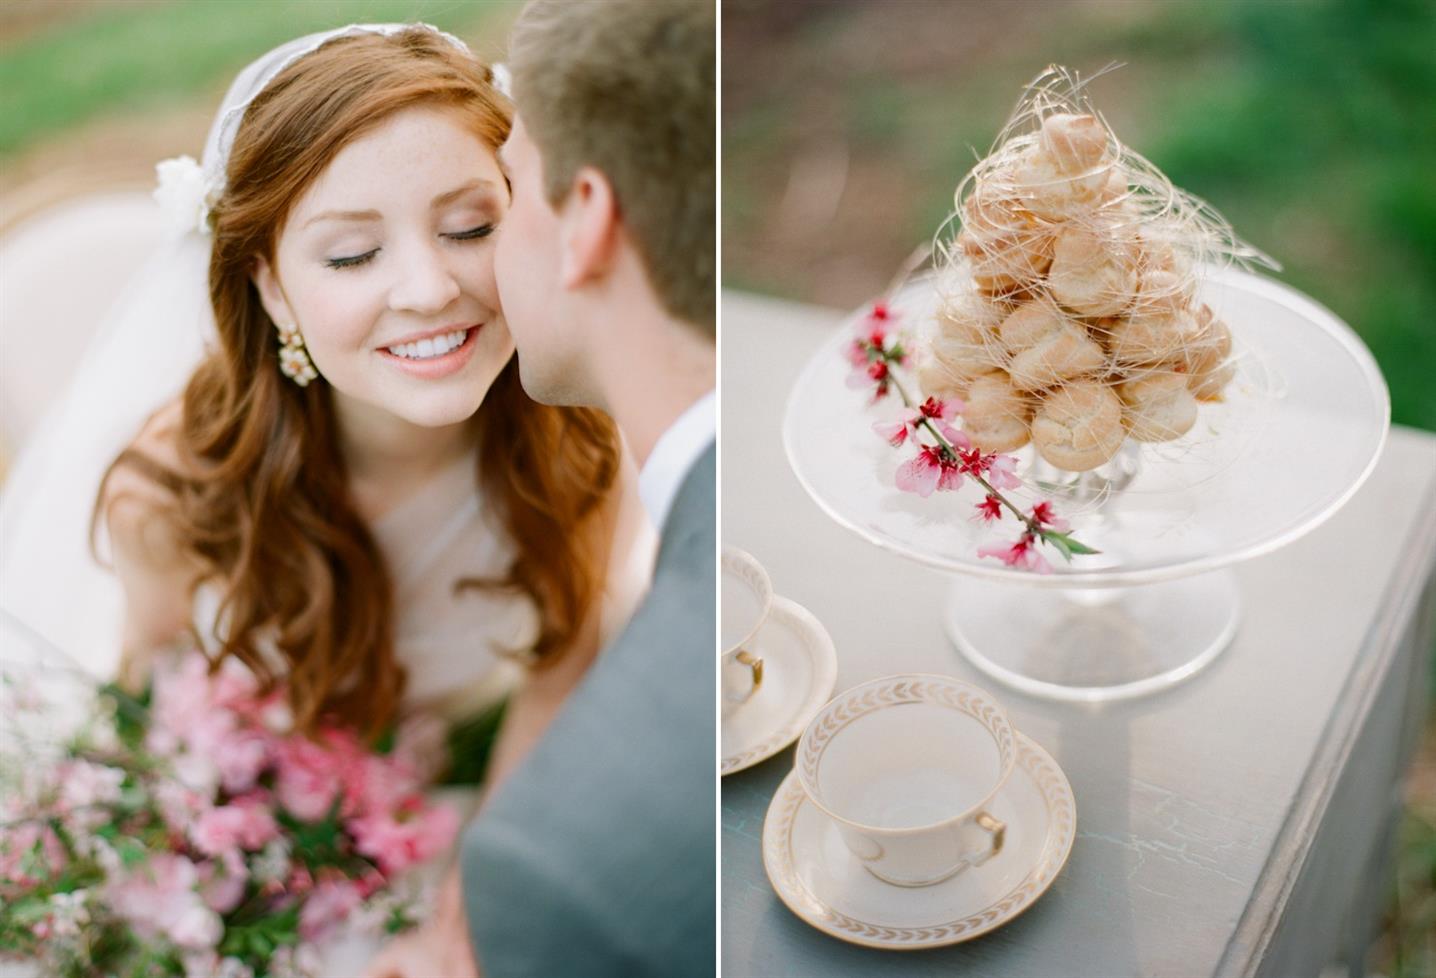 The Prettiest Pink Spring Wedding Inspiration Shoot In A Blossom-Filled Orchard